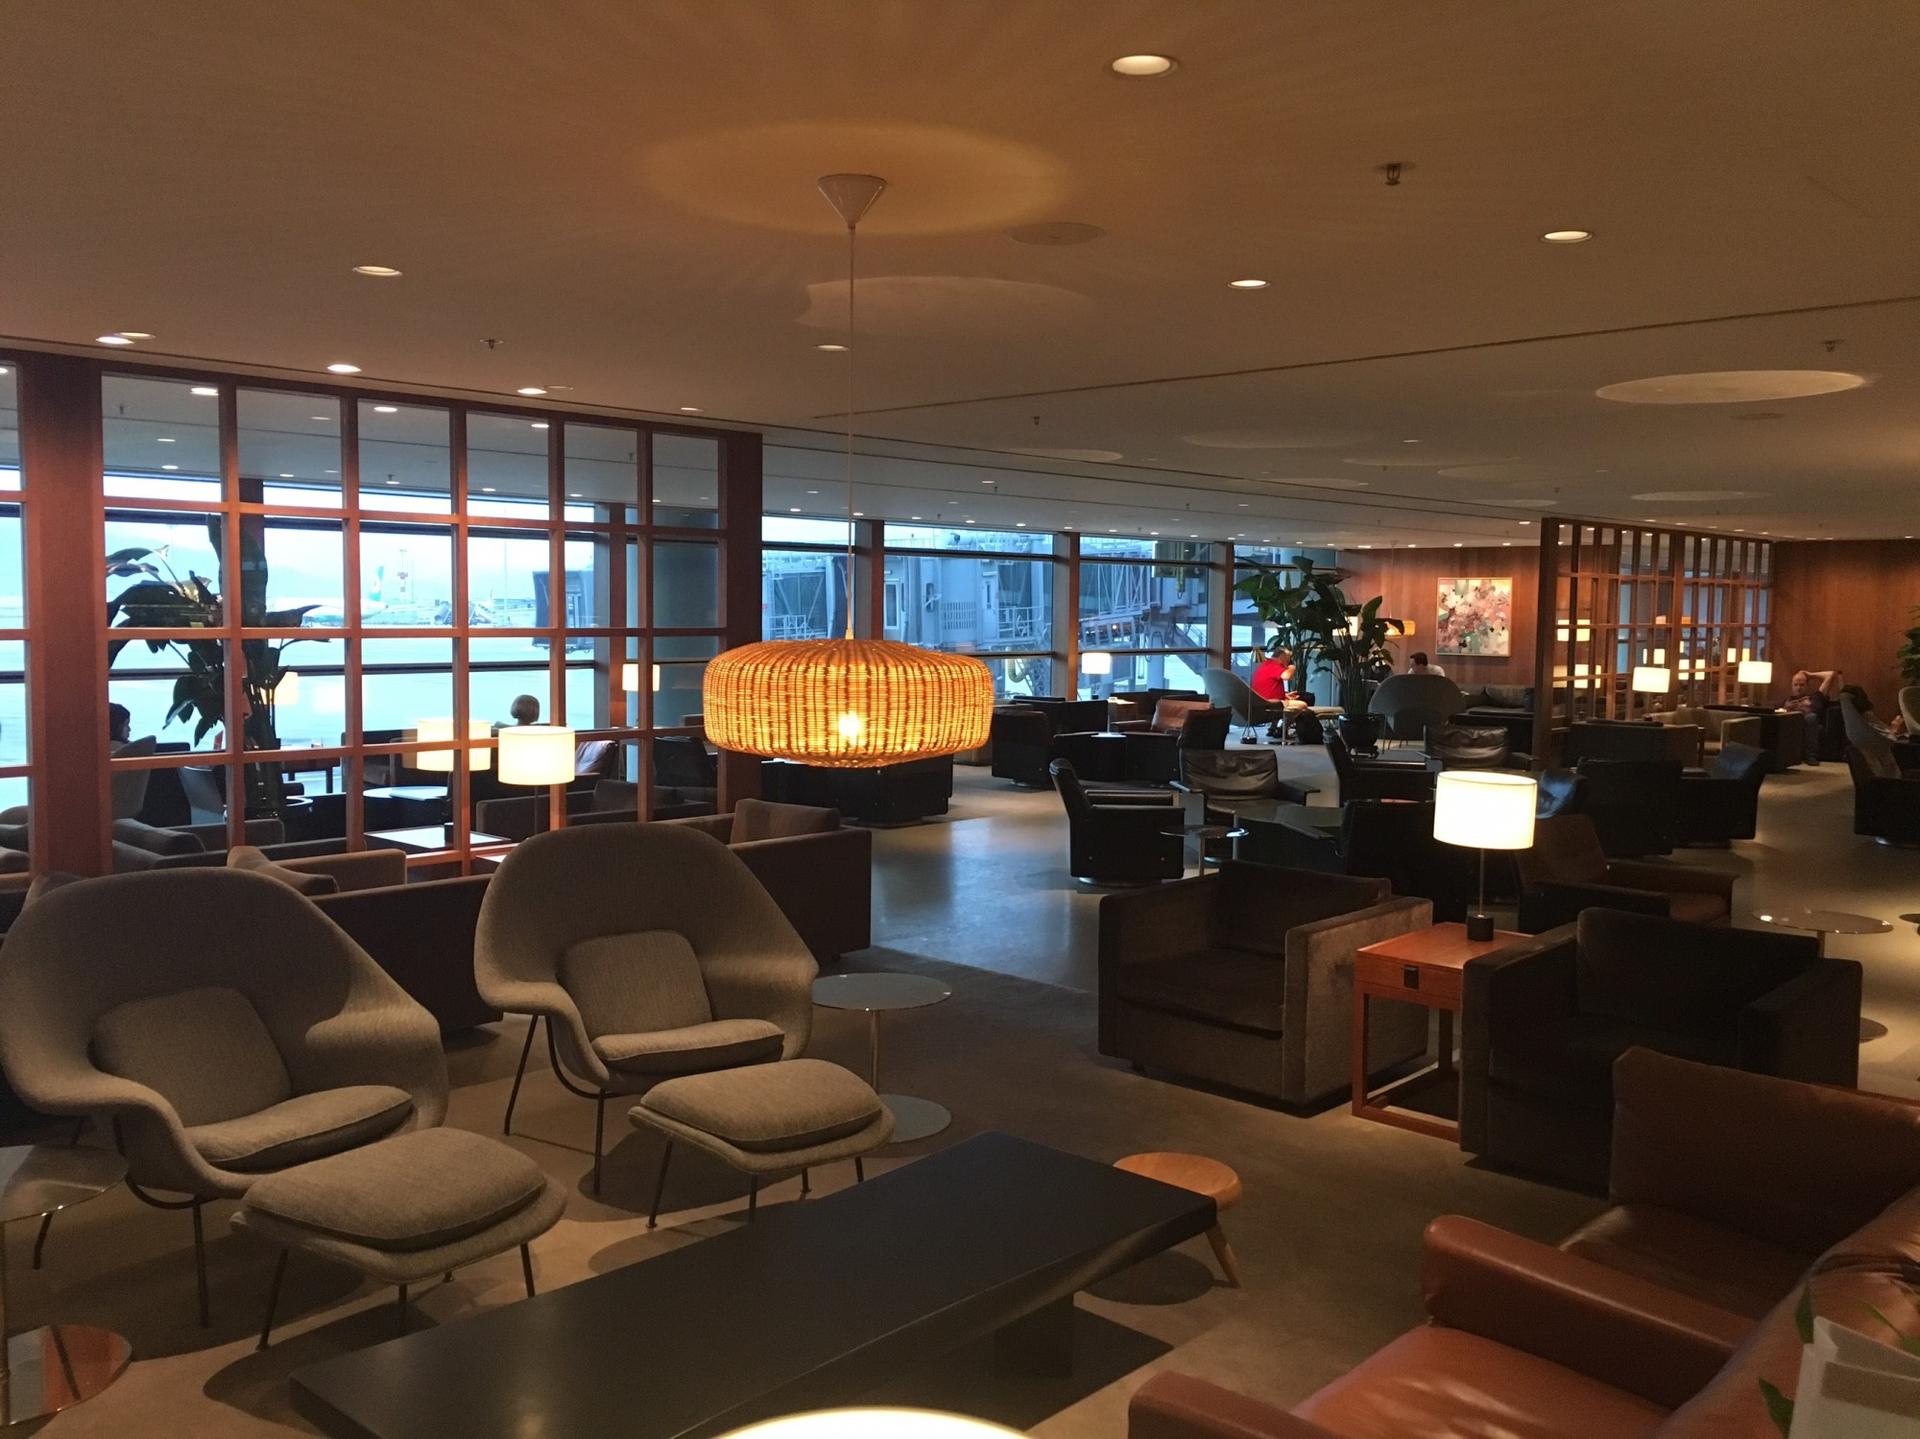 Cathay Pacific The Pier Business Class Lounge image 37 of 61